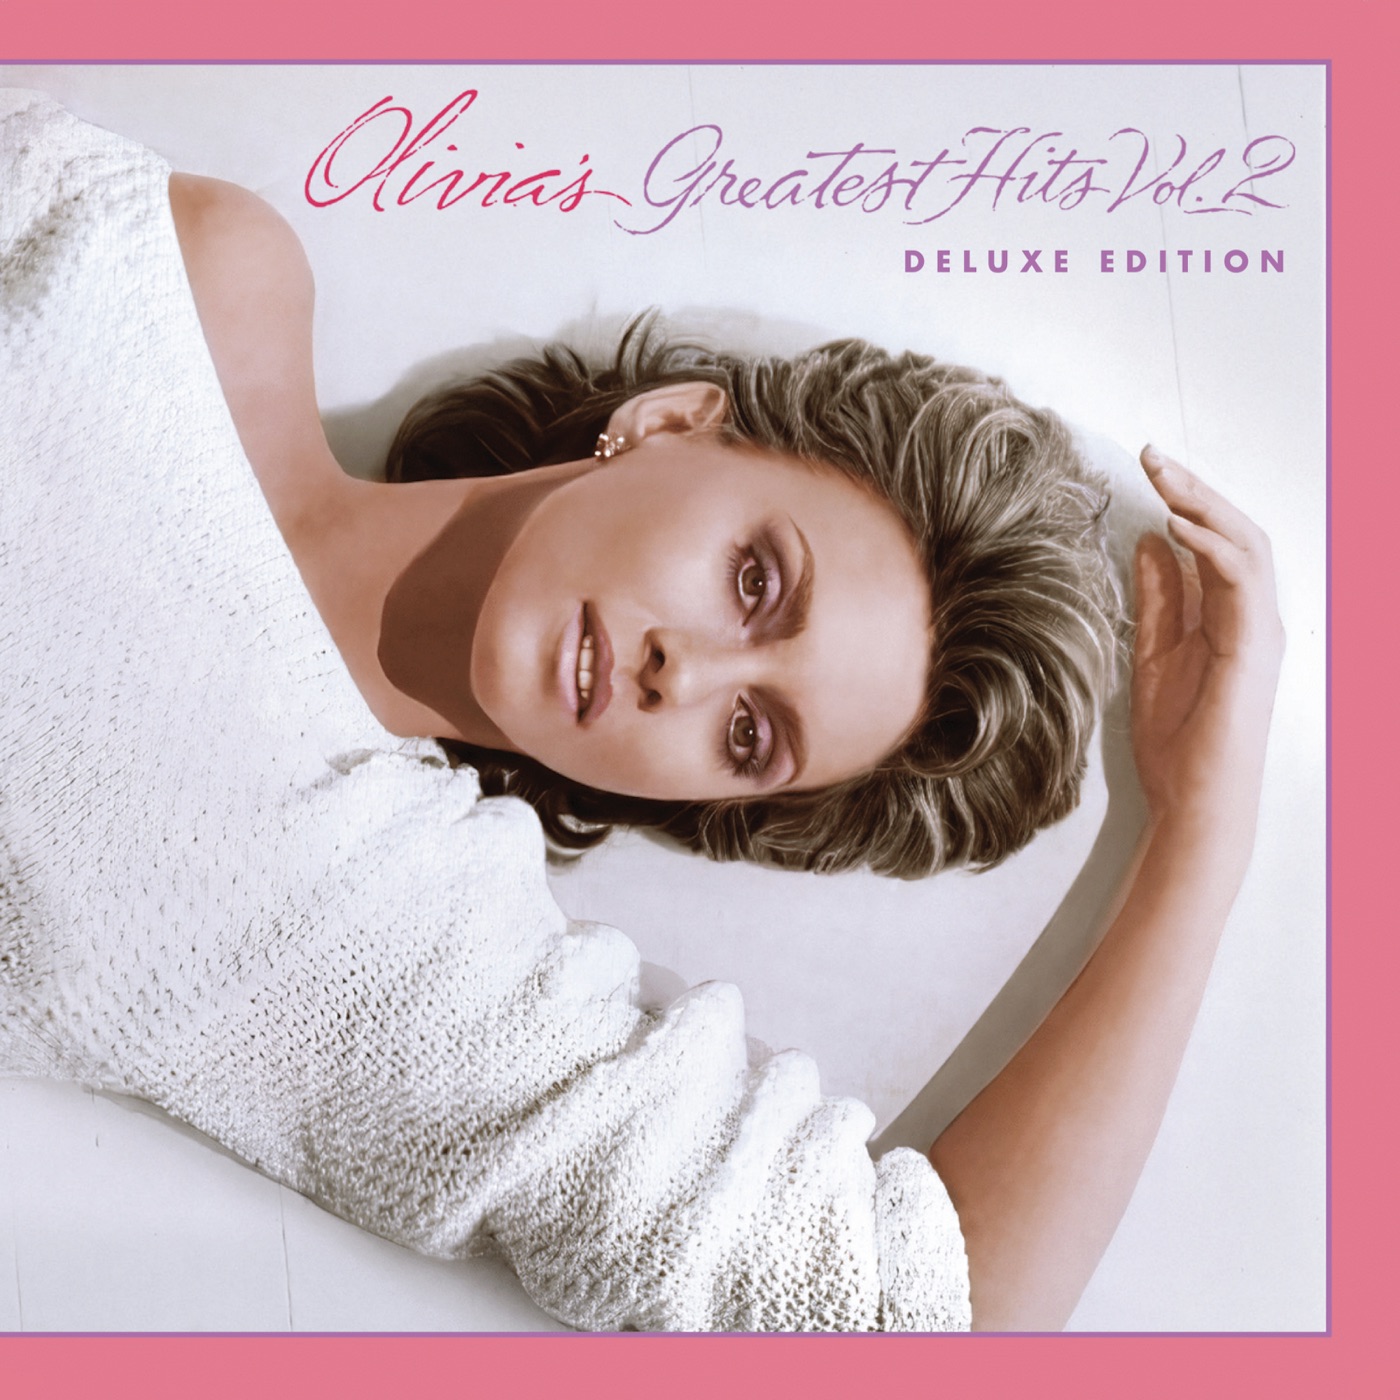 Olivia's Greatest Hits (Vol. 2 / Deluxe Edition / Remastered) by Olivia Newton-John